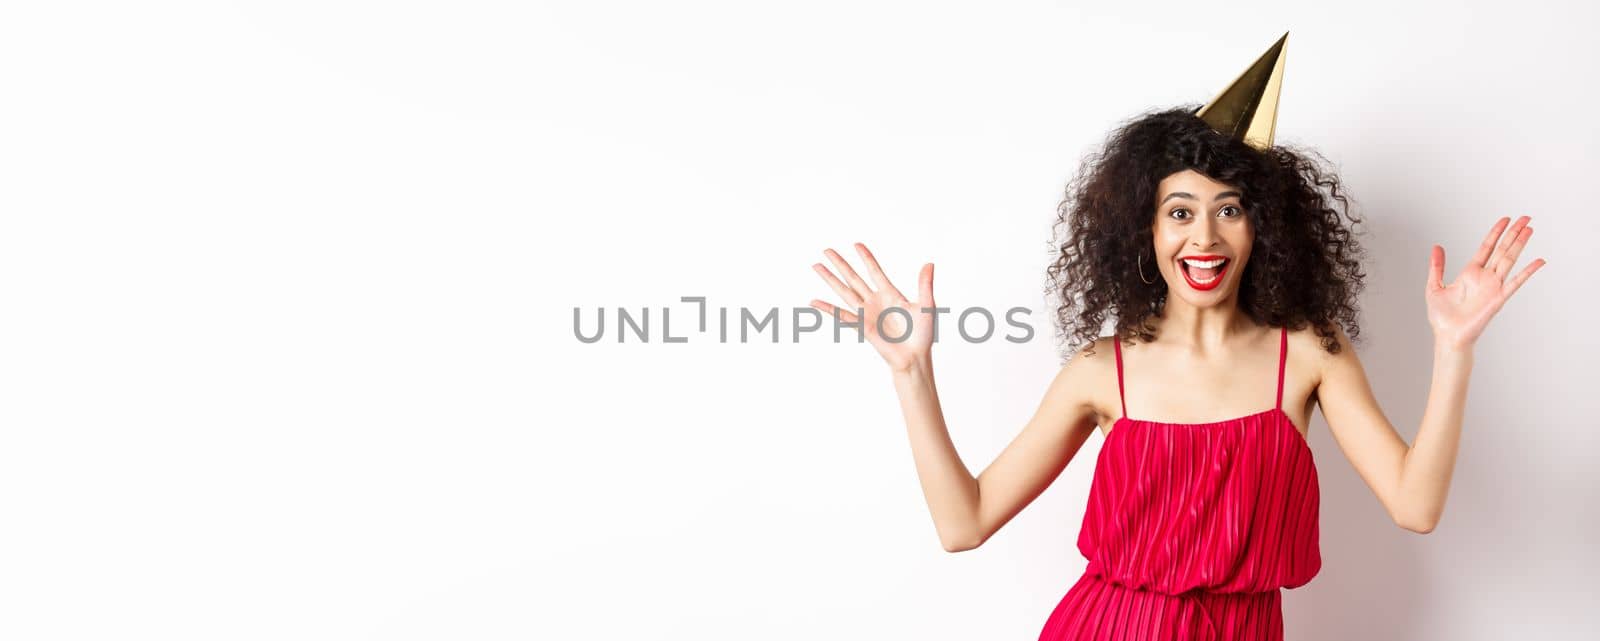 Cheerful young woman in red dress, celebrating birthday, wearing party hat and smiling, screaming of joy, standing on white background.